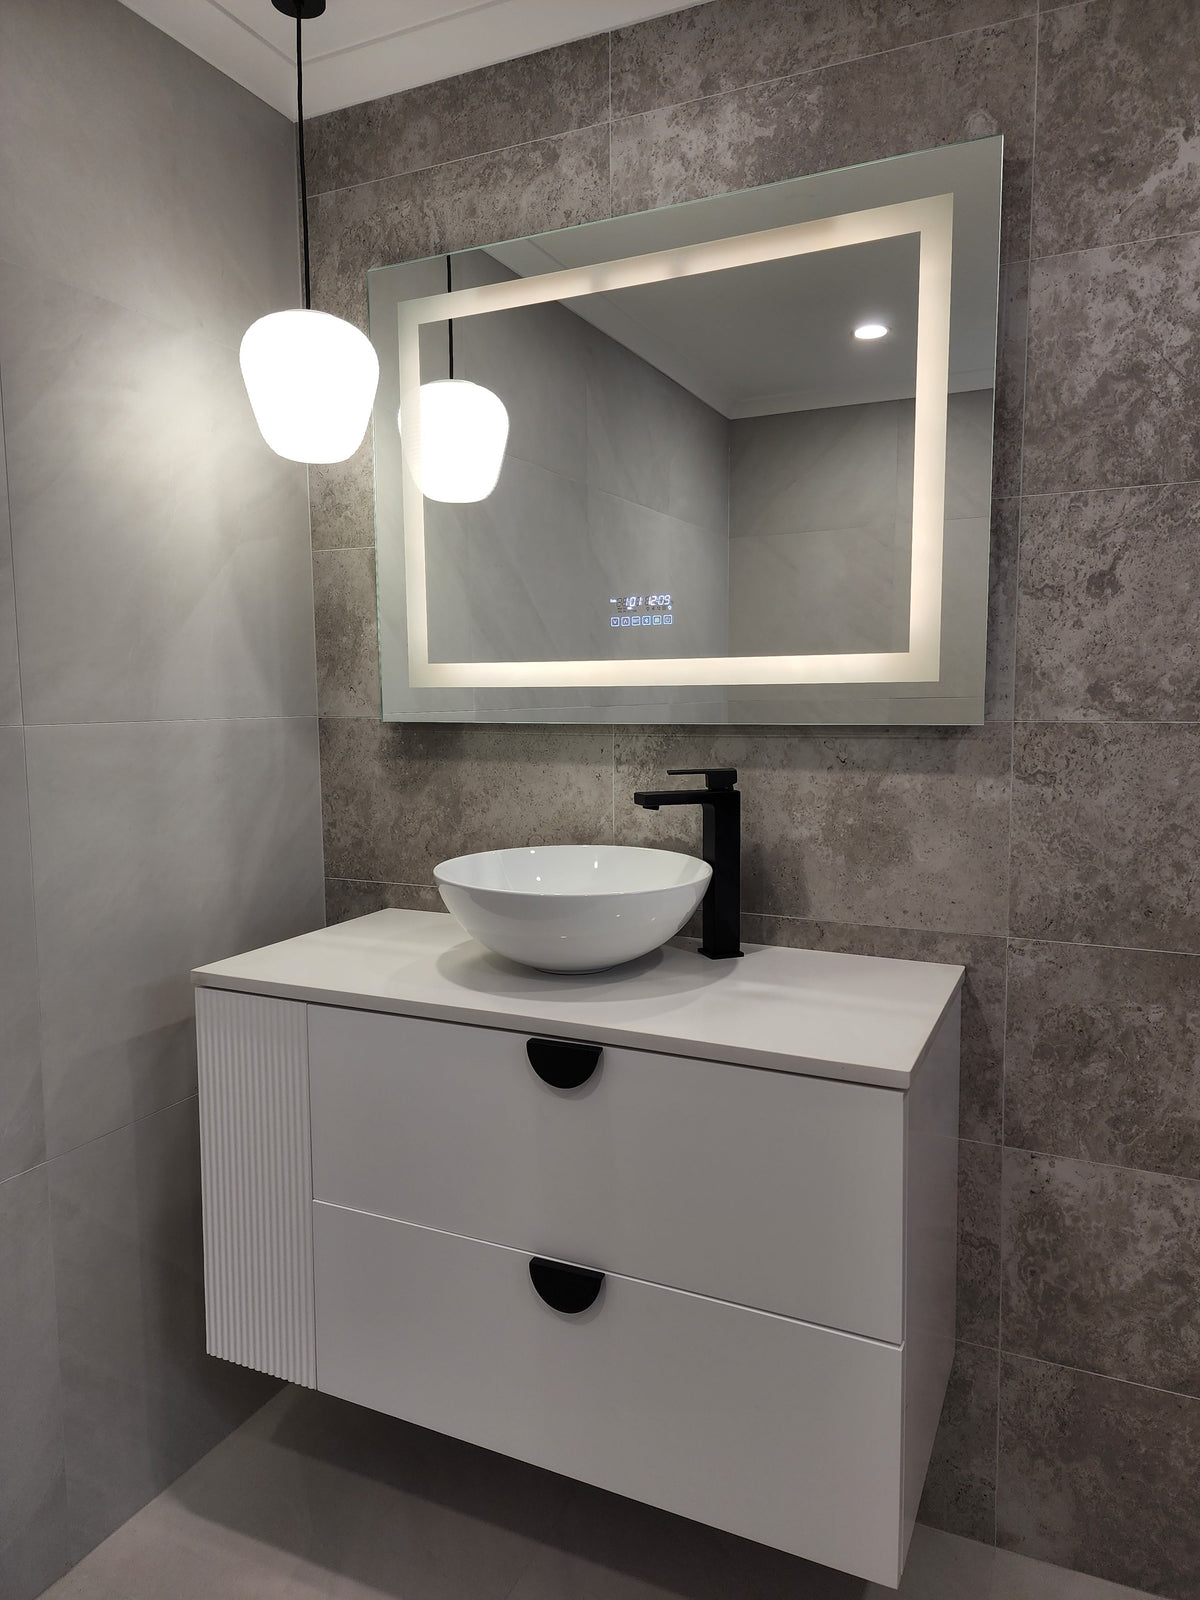 Vanity Area in Dirty Grey Bathroom with Front-Lighted LED Mirror, Pendant Light, and Cabinet